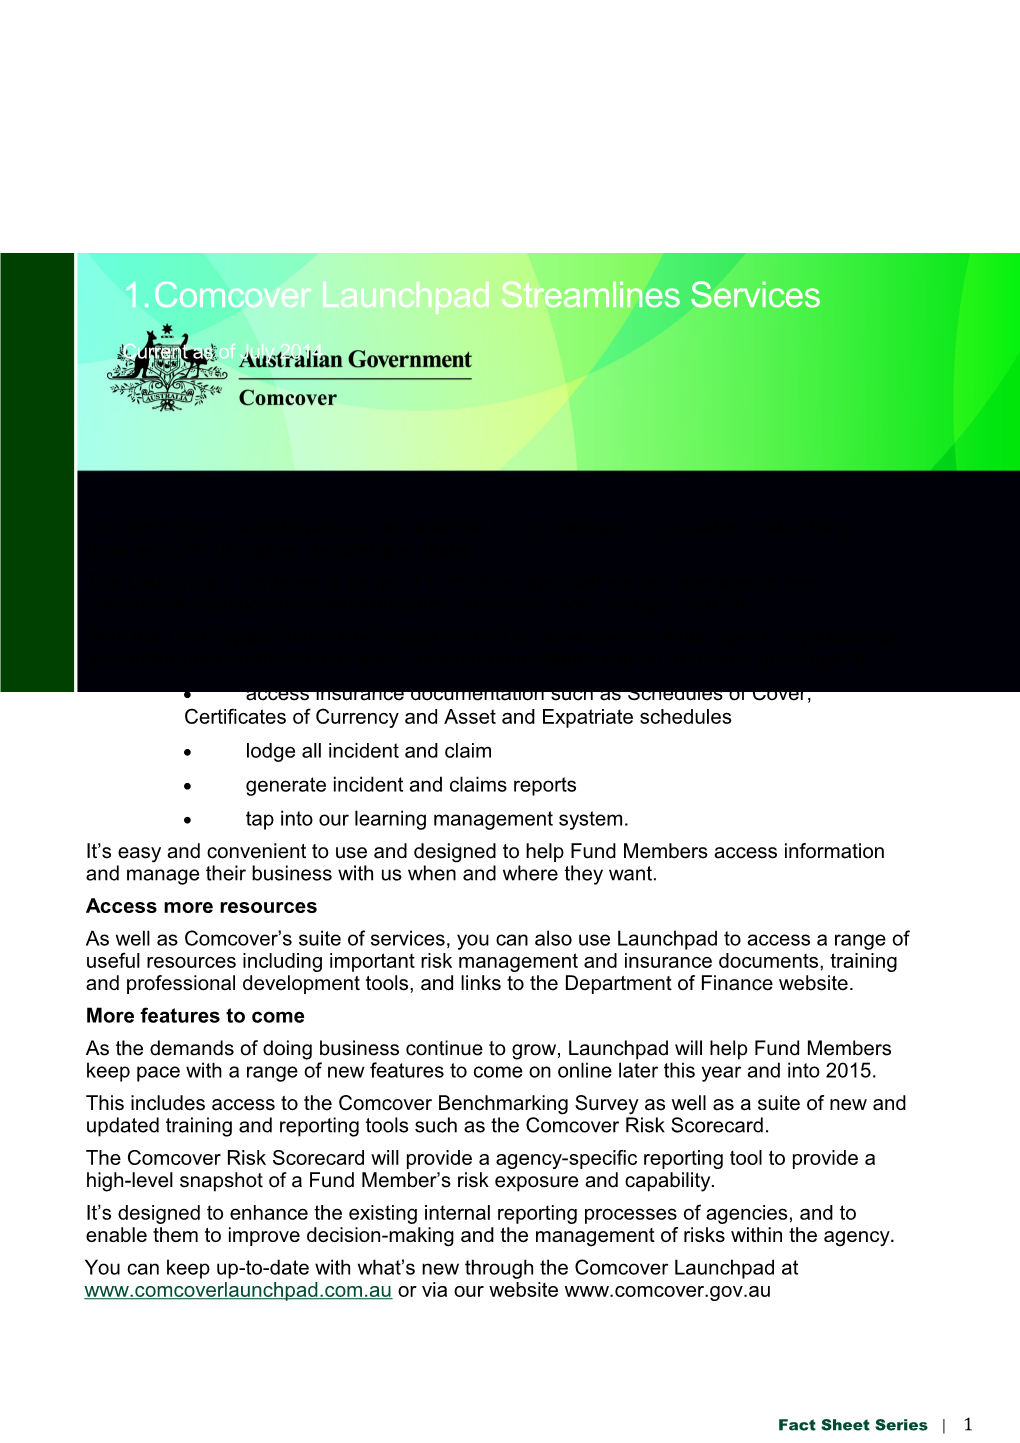 Comcover Launchpad Streamlines Services